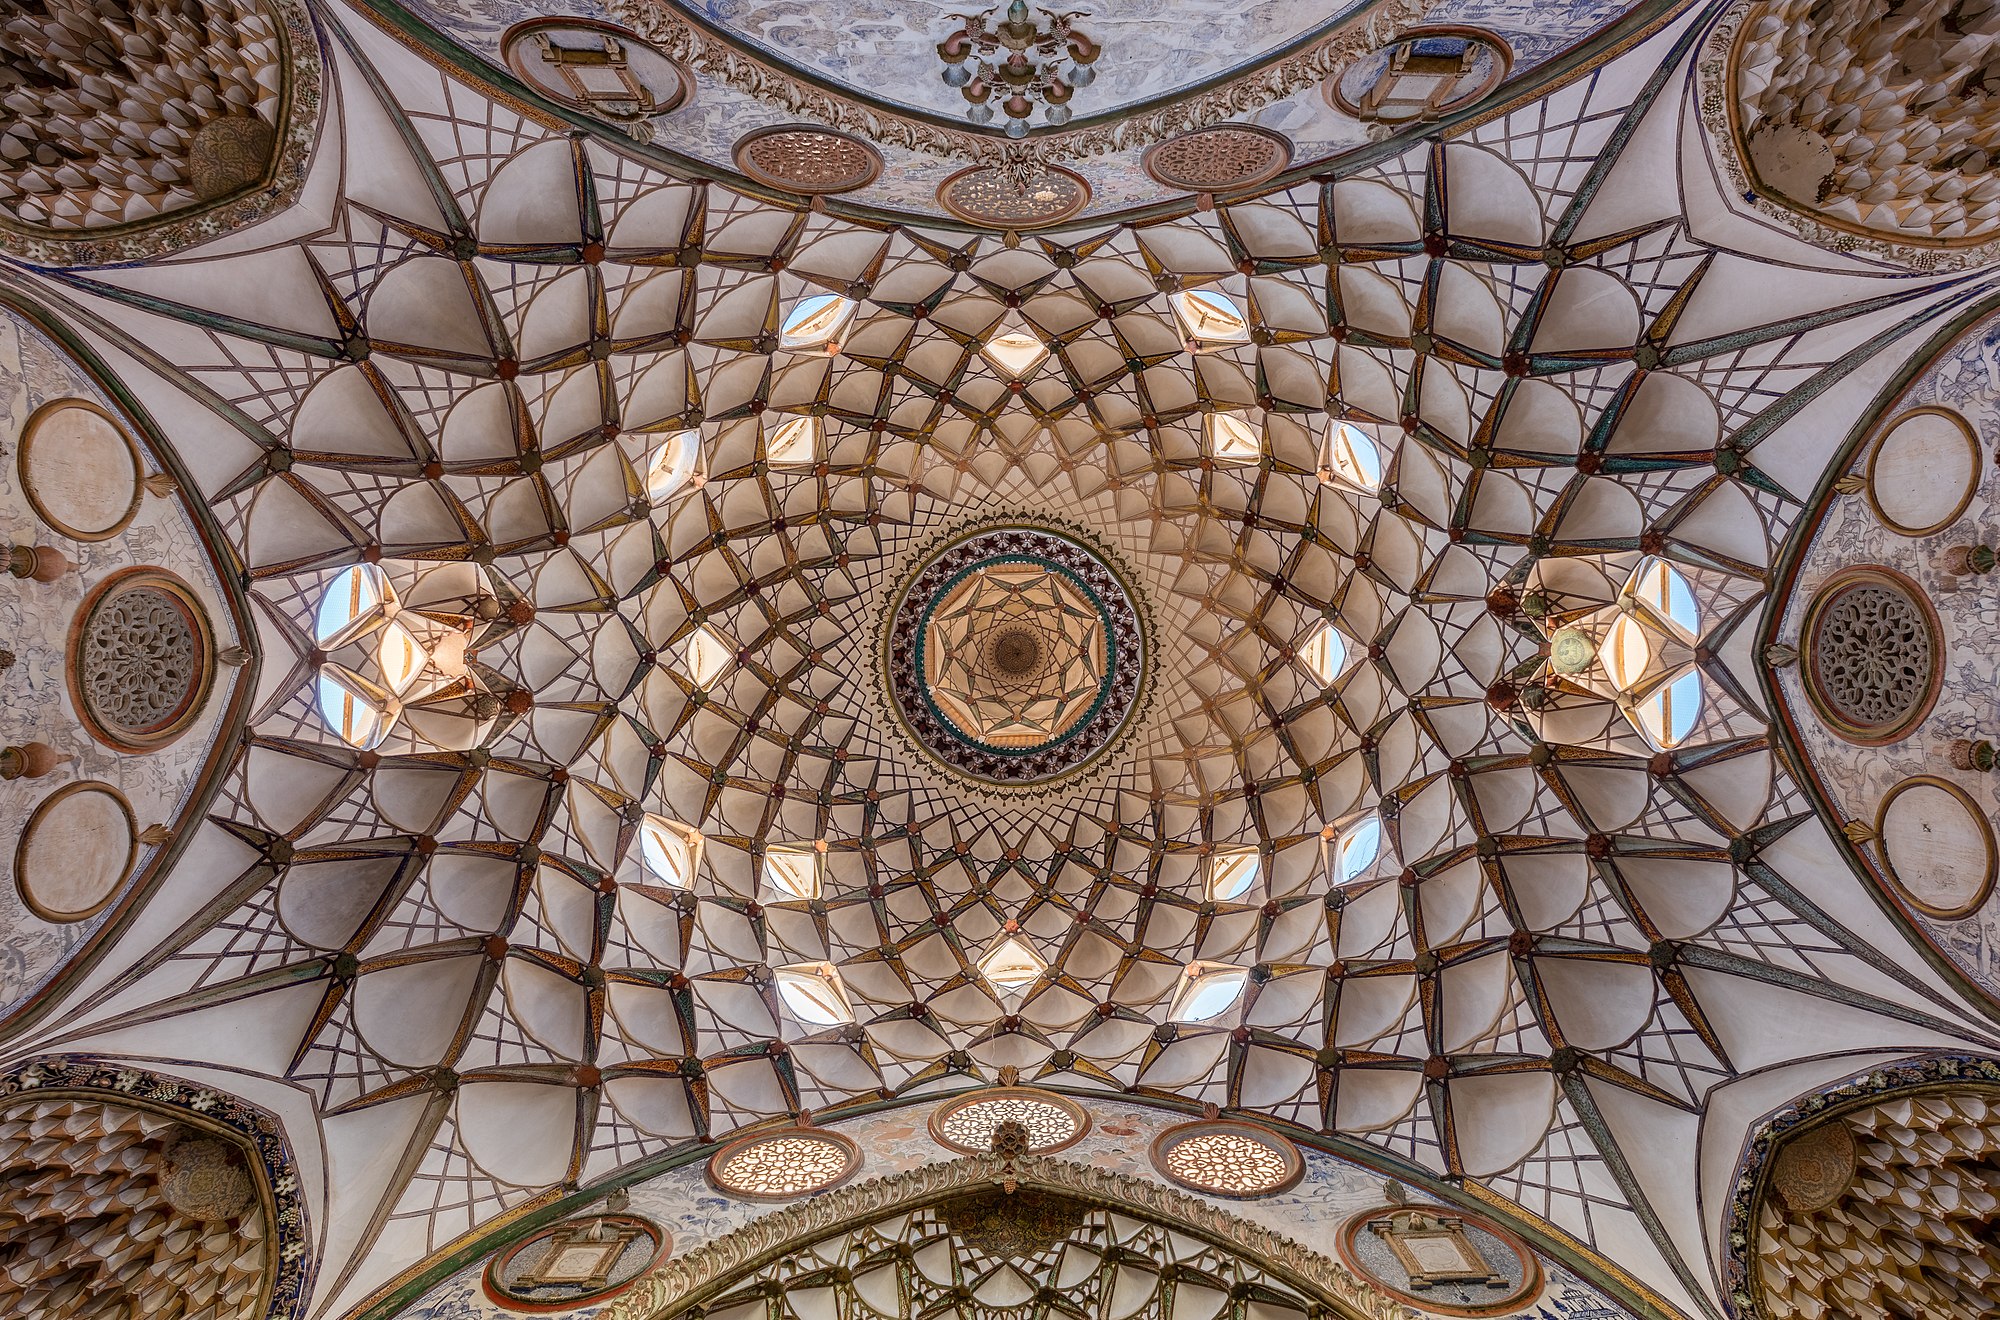 View of the rich ceiling of the interior courtyard of the Borujerdi House, a historic house located in Kashan, Iran. The house dates from 1857 and was constructed by architect Ustad Ali Maryam for a wealthy merchant as proof of love to his wife.